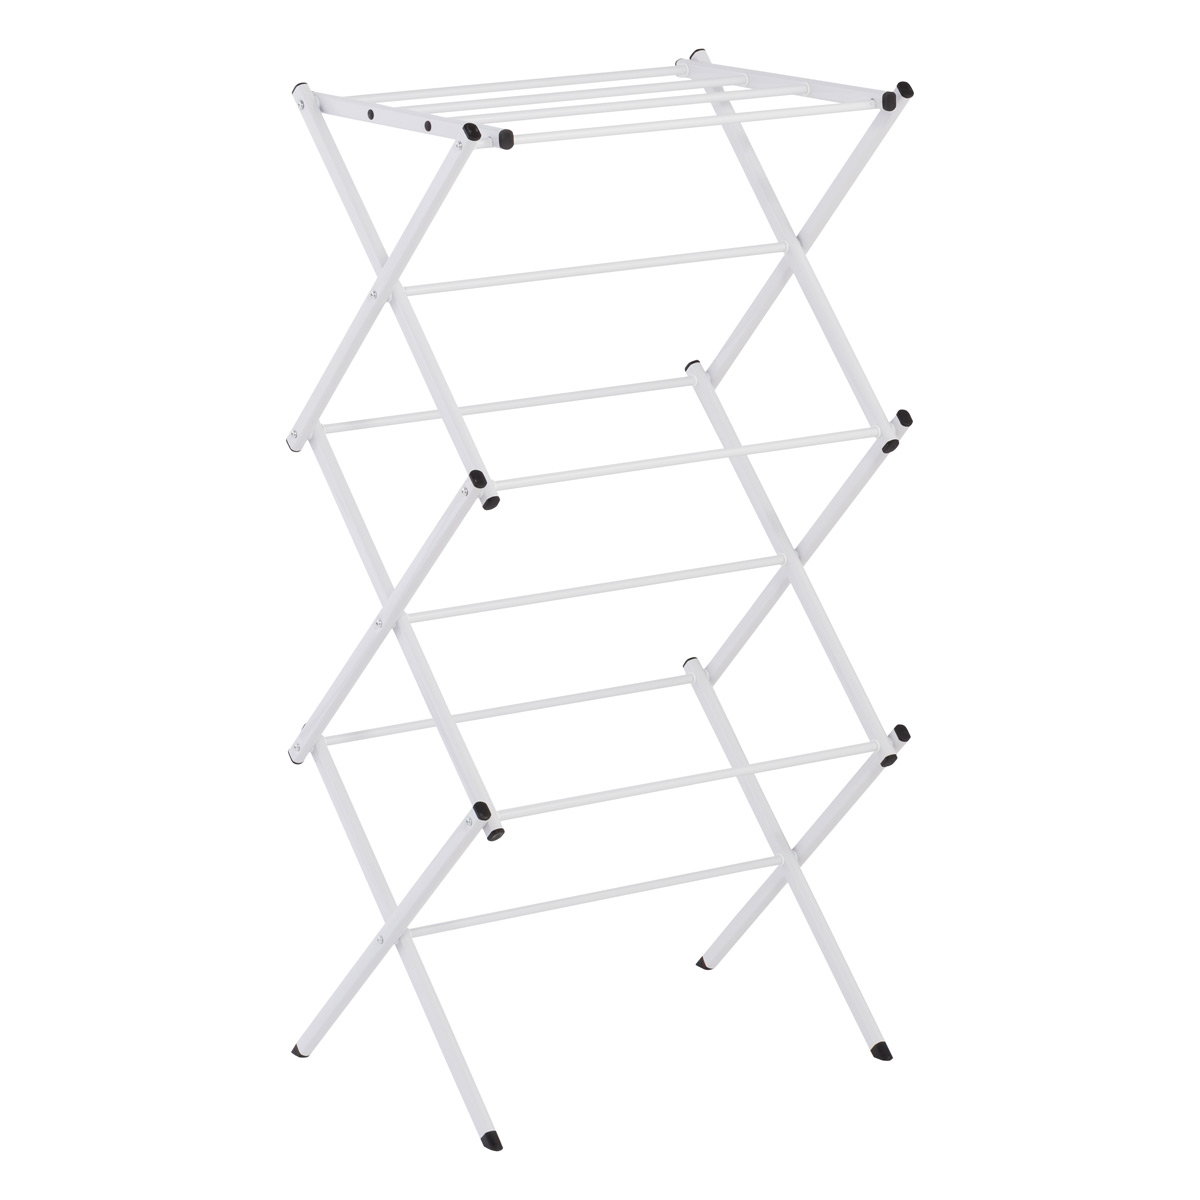 https://www.containerstore.com/catalogimages/296844/10070482CompactAccordianDryingRackWh.jpg